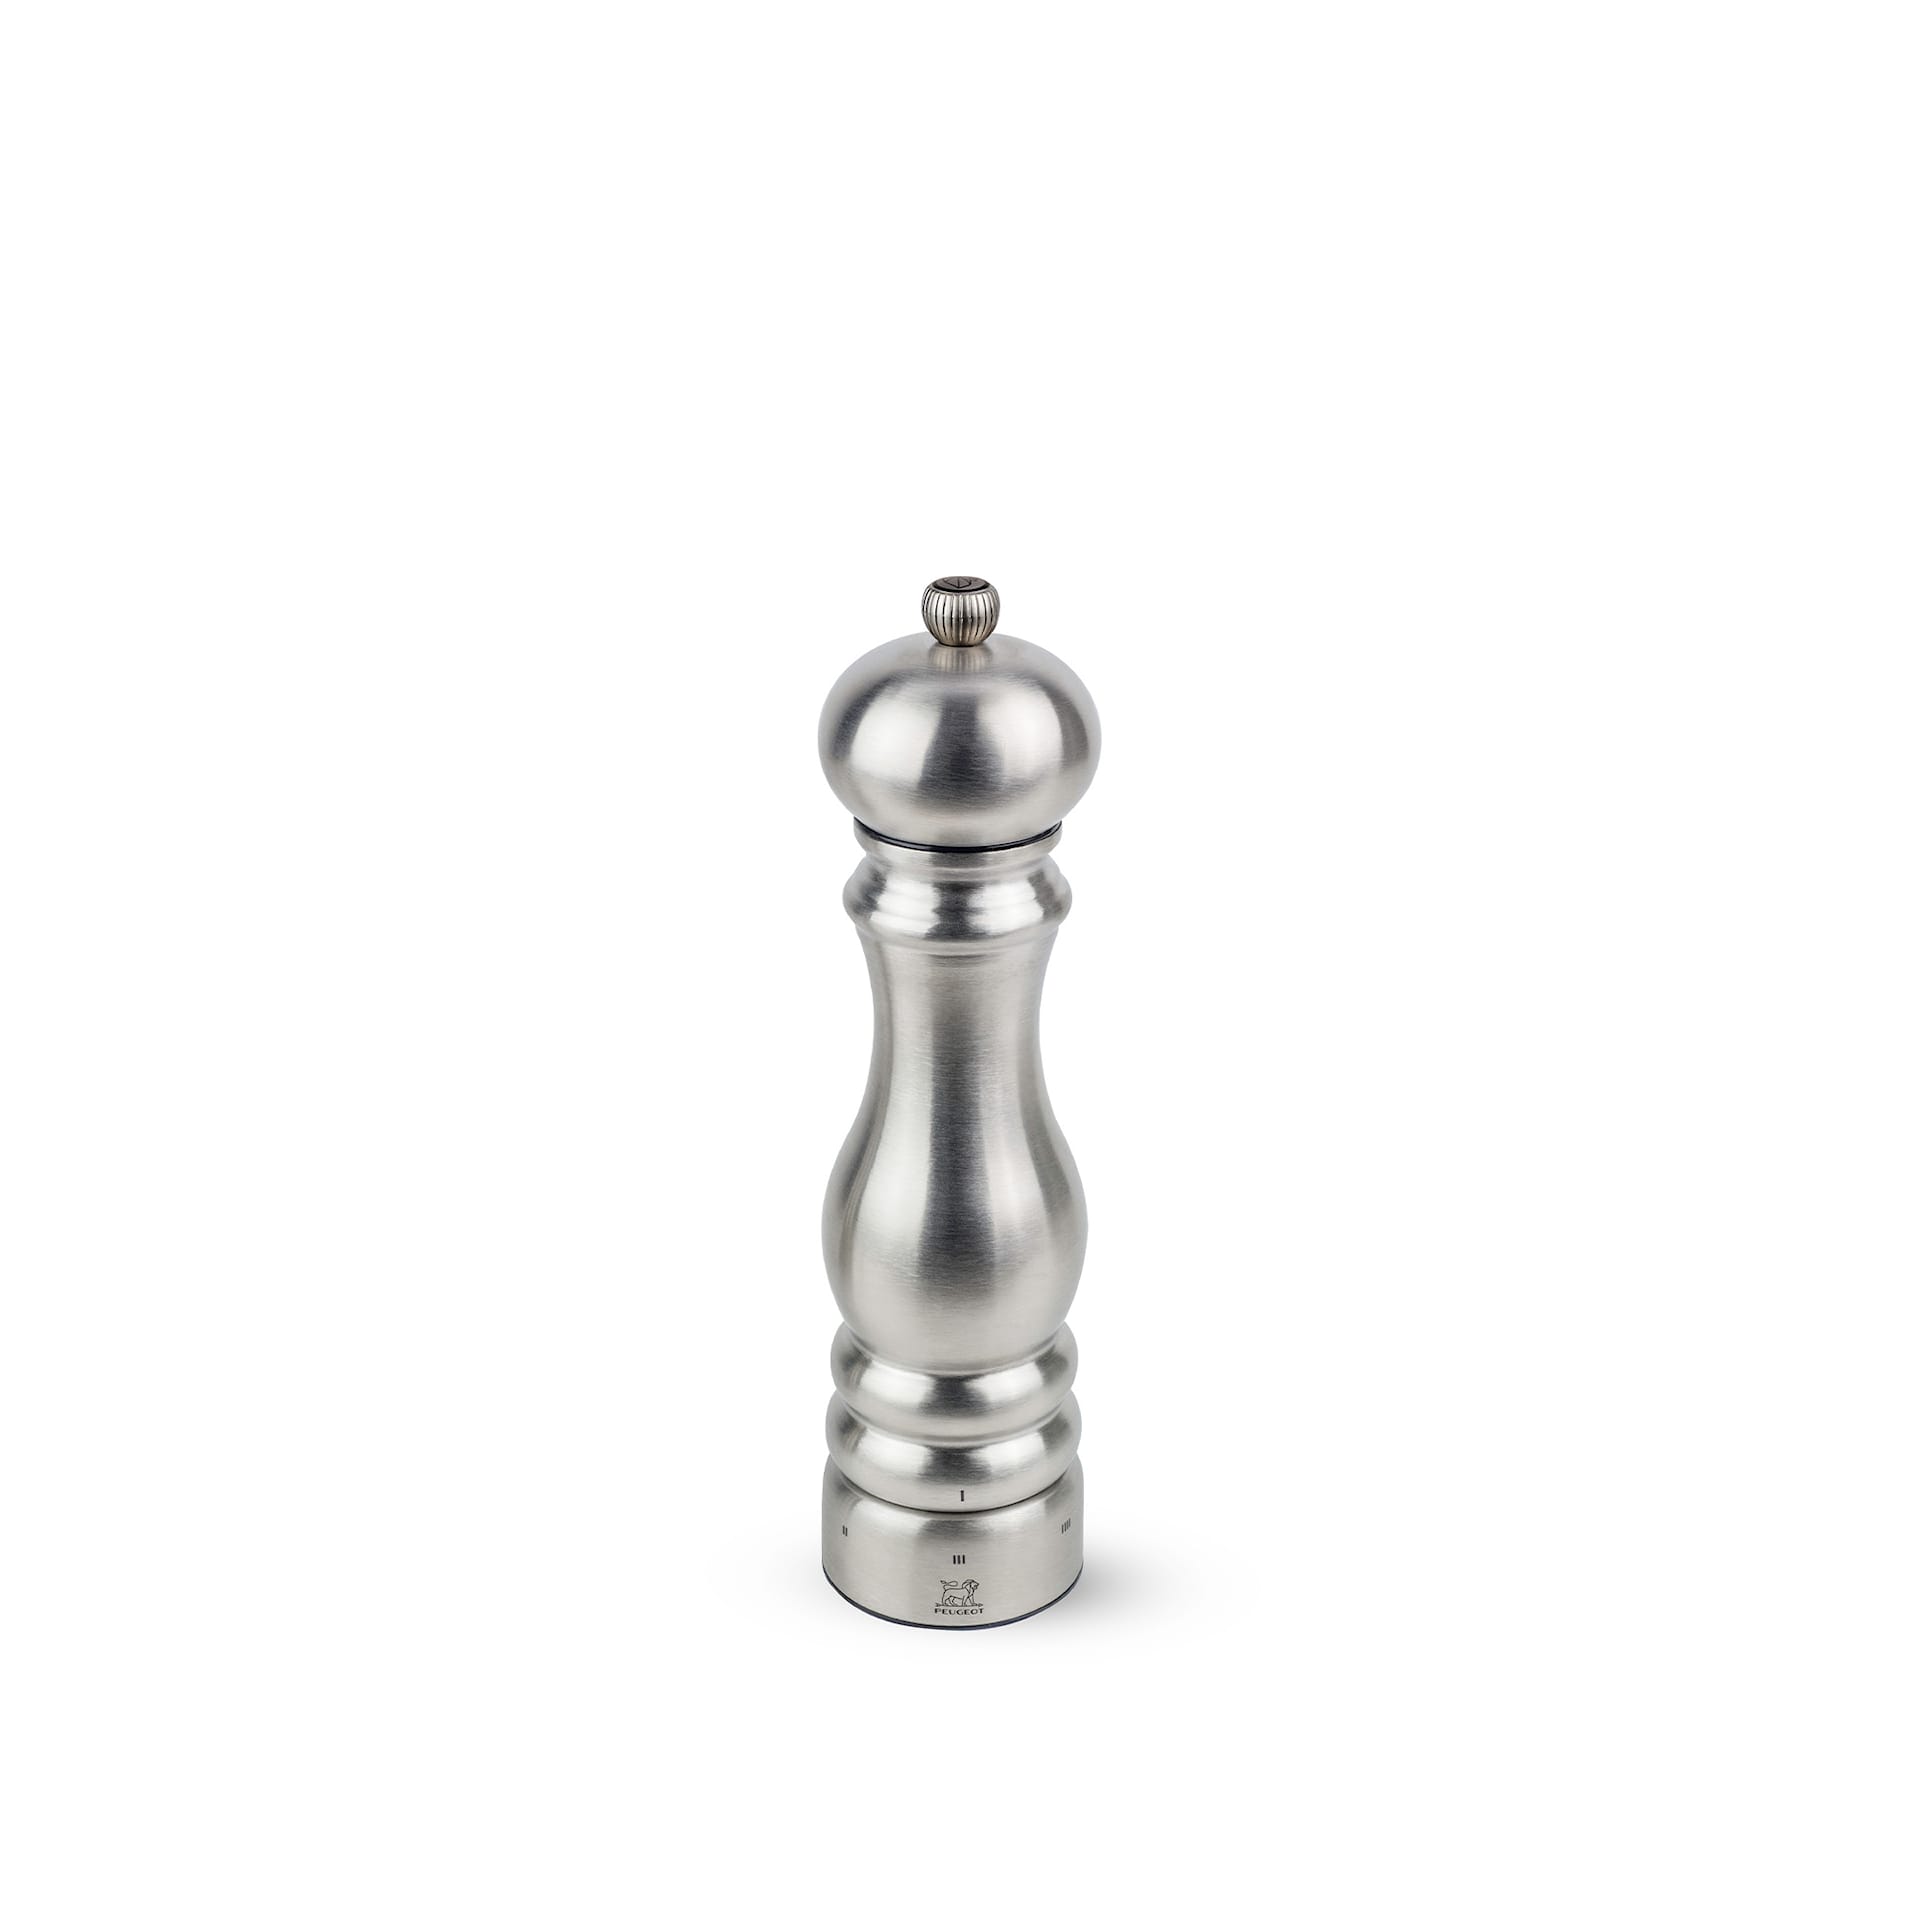 Paris Chef Pepper Mill - Stainless Steel - Peugeot - NO GA